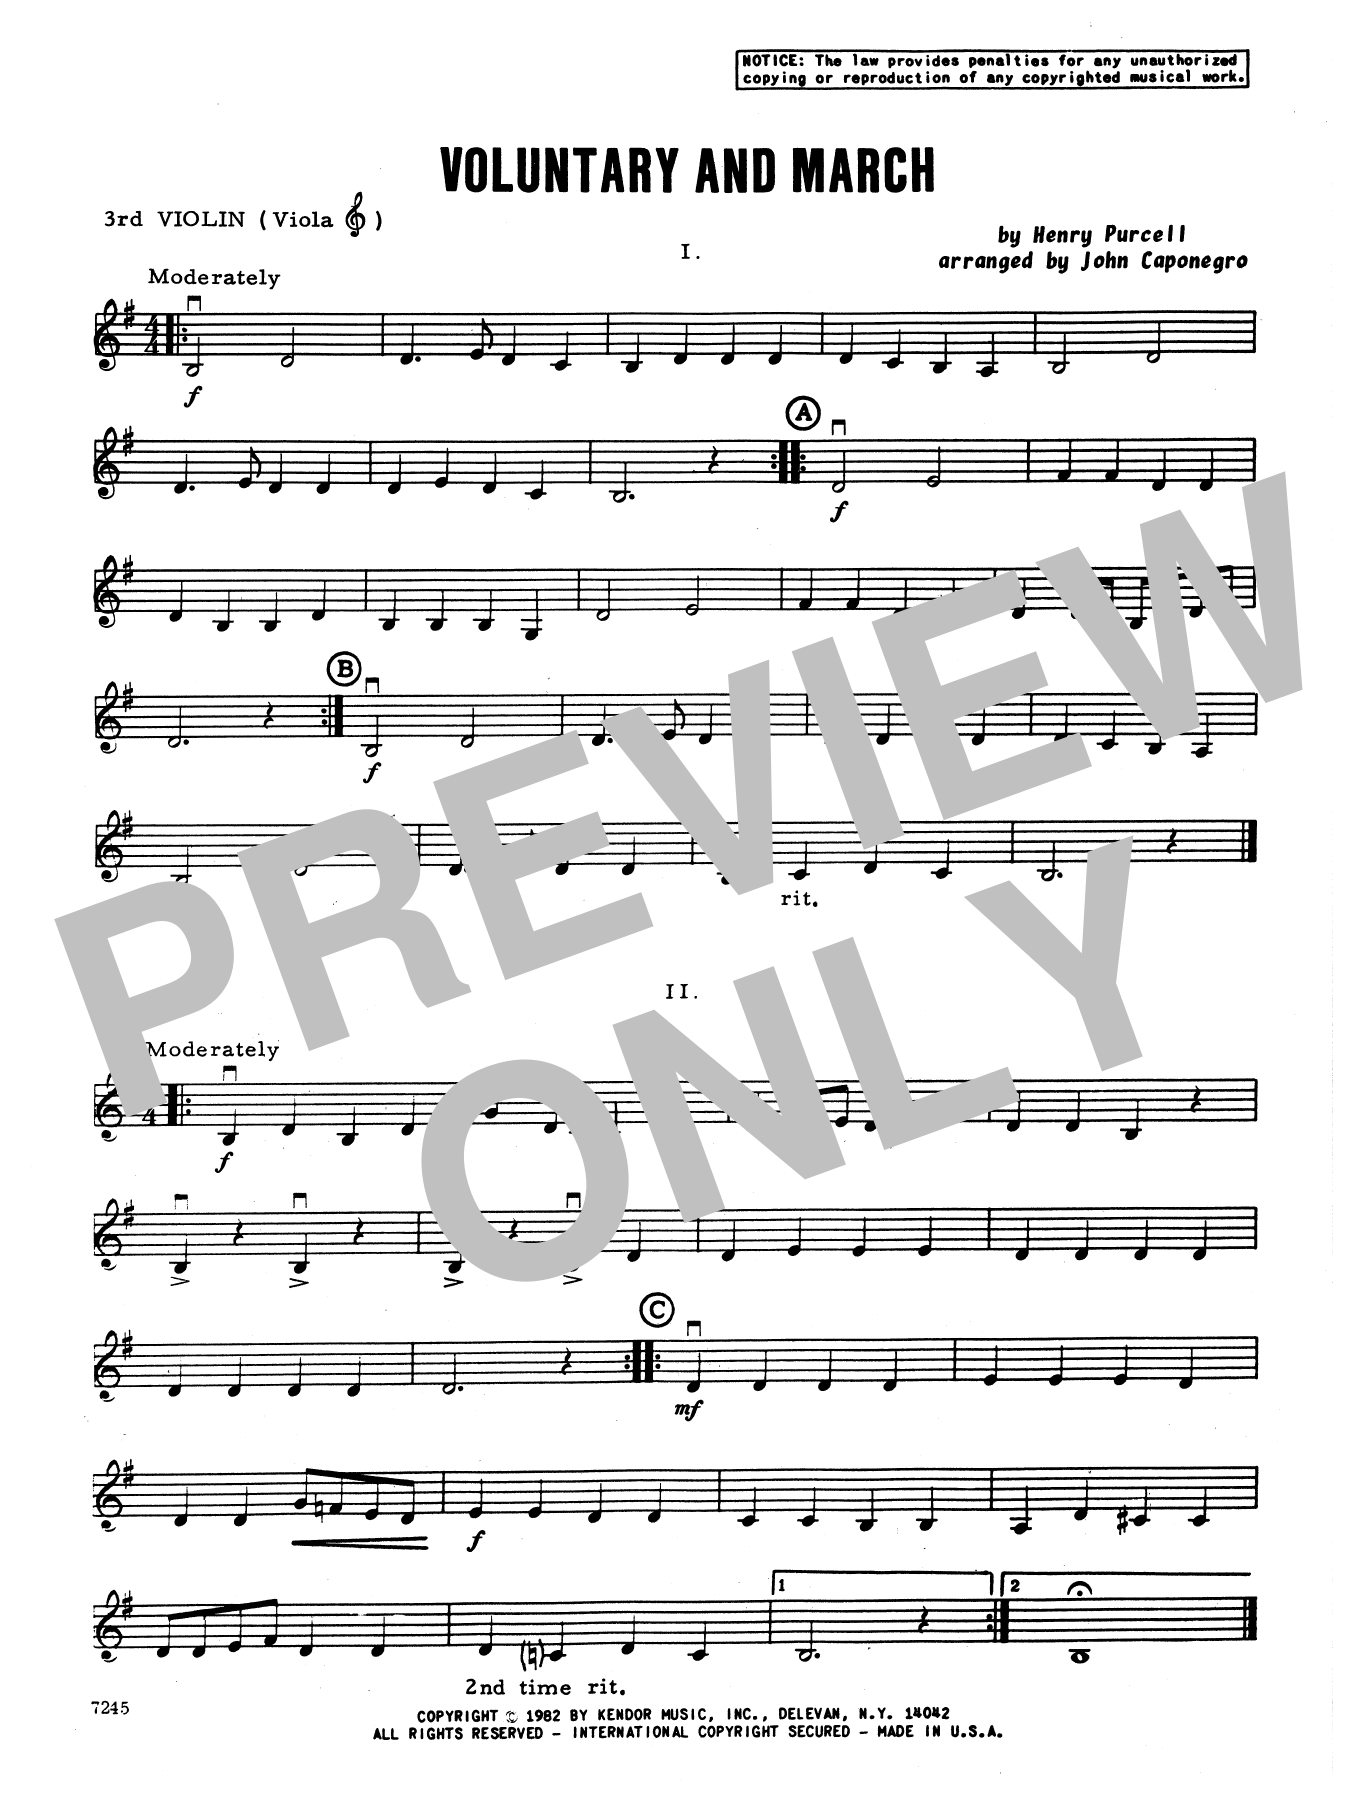 Download John Caponegro Voluntary and March - Violin 3 (Viola T Sheet Music